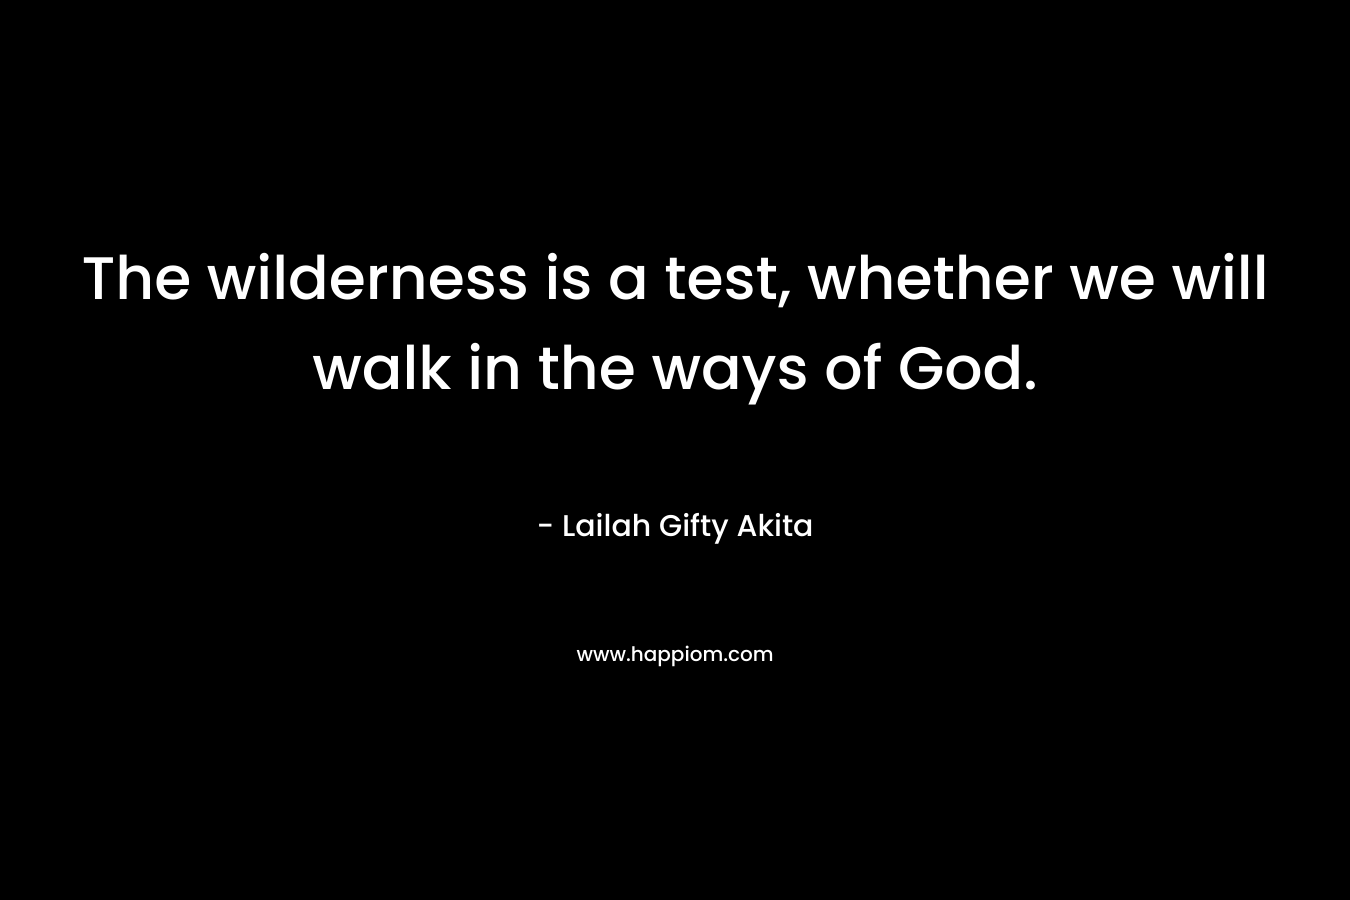 The wilderness is a test, whether we will walk in the ways of God.